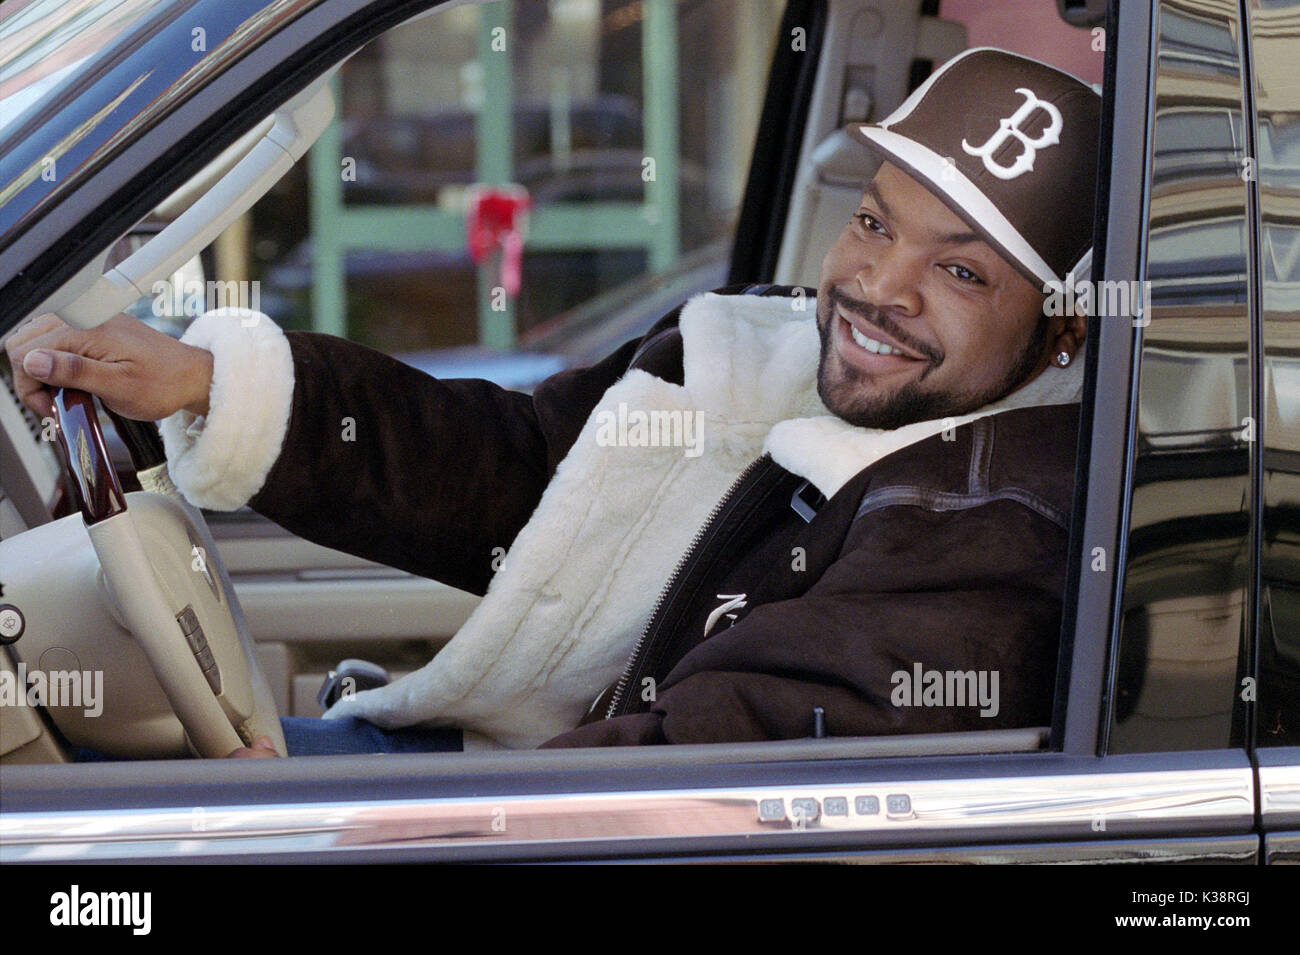 C43-6a Ice Cube stars in Revolution Studios' family comedy ARE WE THERE YET?, a Columbia Pictures release.  Photo by: Rob McEwan ARE WE THERE YET? [US 2005]  ICE CUBE     Date: 2005 Stock Photo